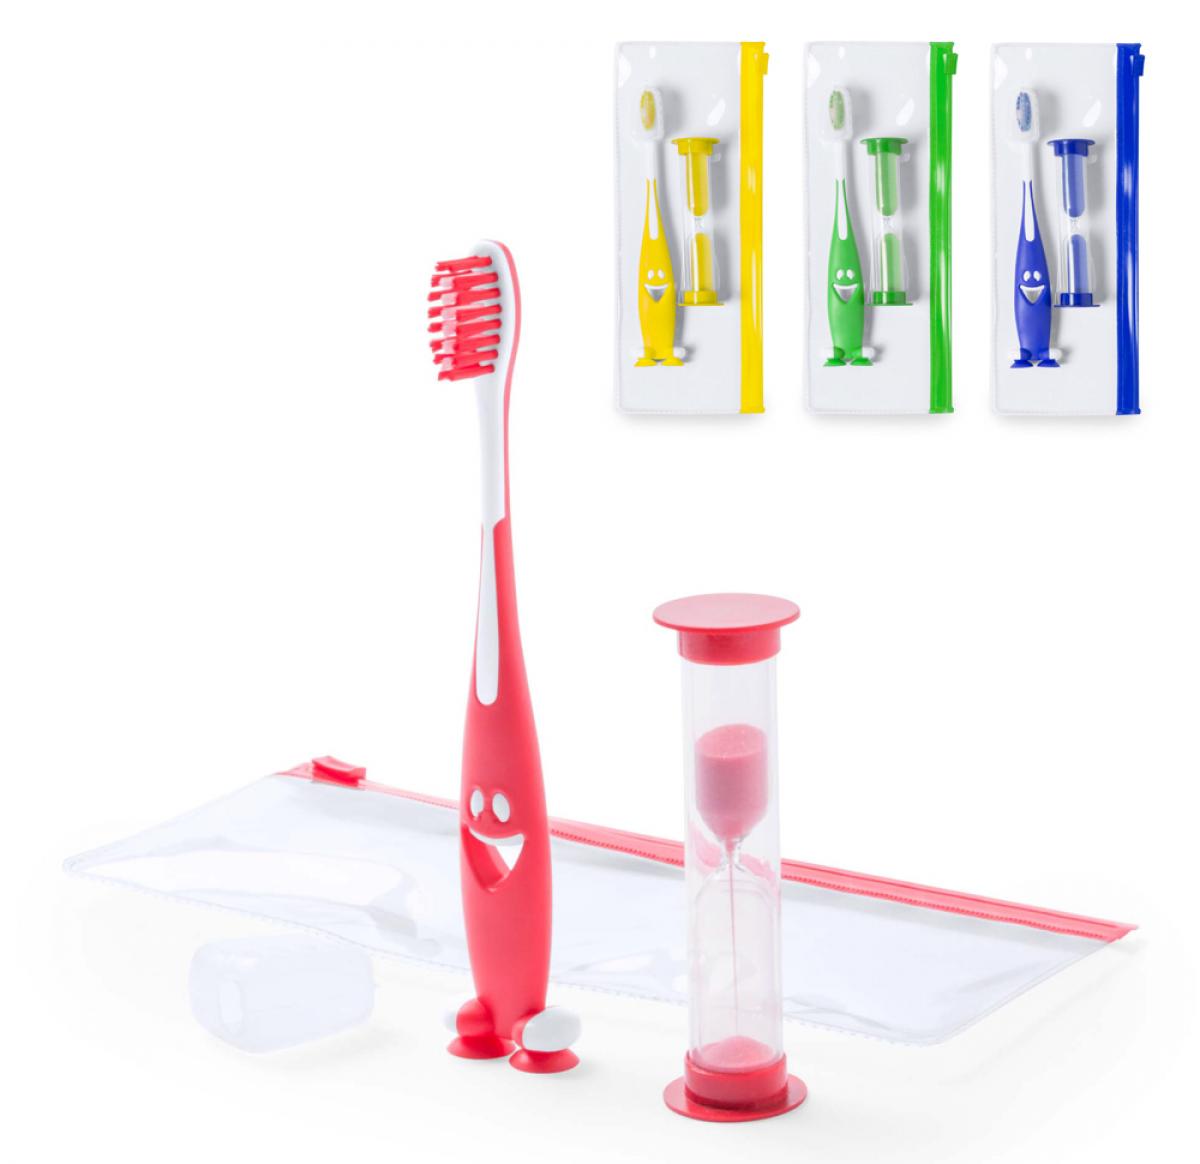 Toothbrush Set Contains Brush, Sand Timer & Travel Pouch